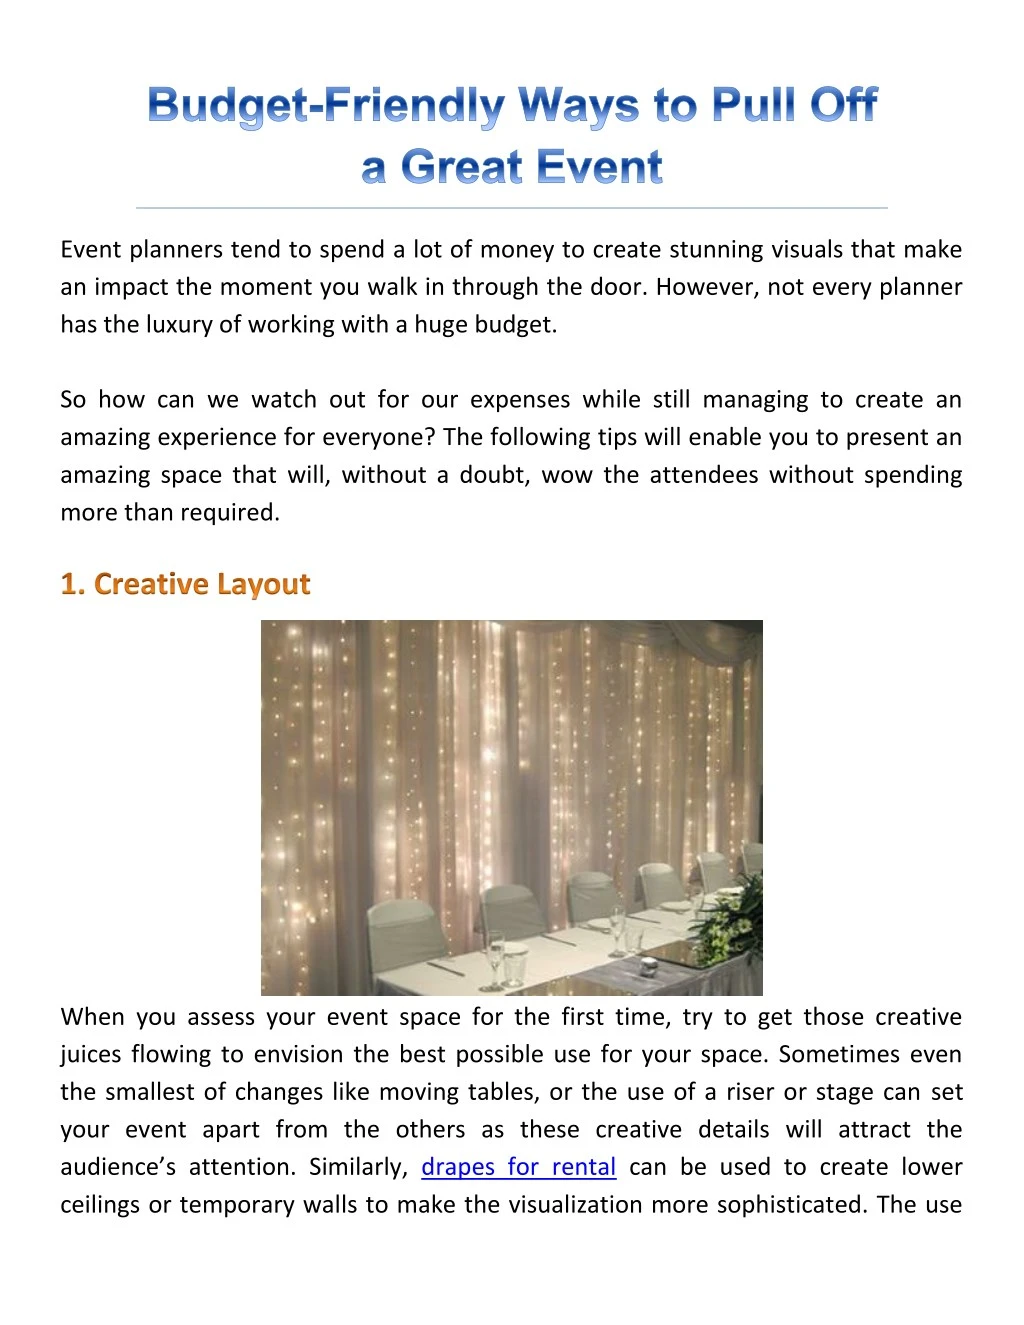 event planners tend to spend a lot of money